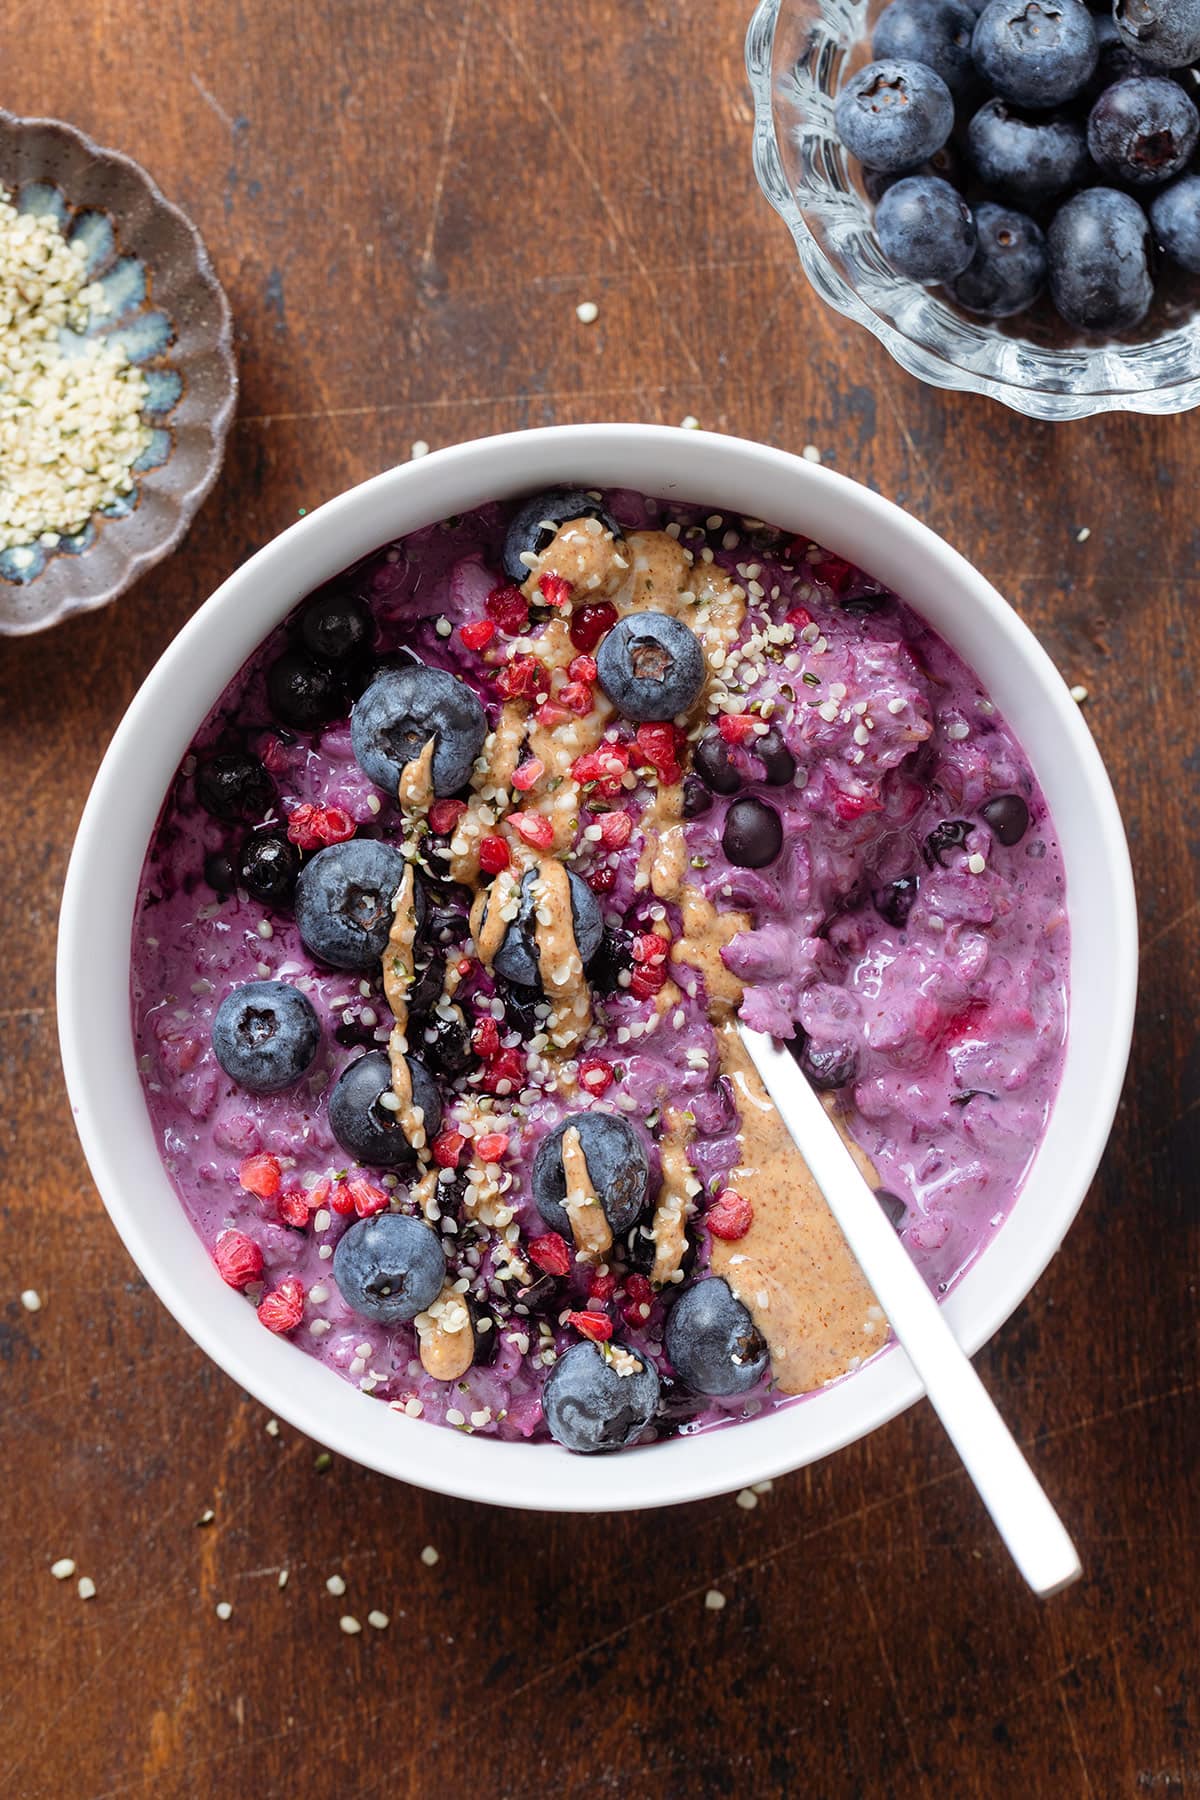 Bright purple blueberry oatmeal garnished with blueberries, nut butter, and hemp seeds on a dark wooden background.